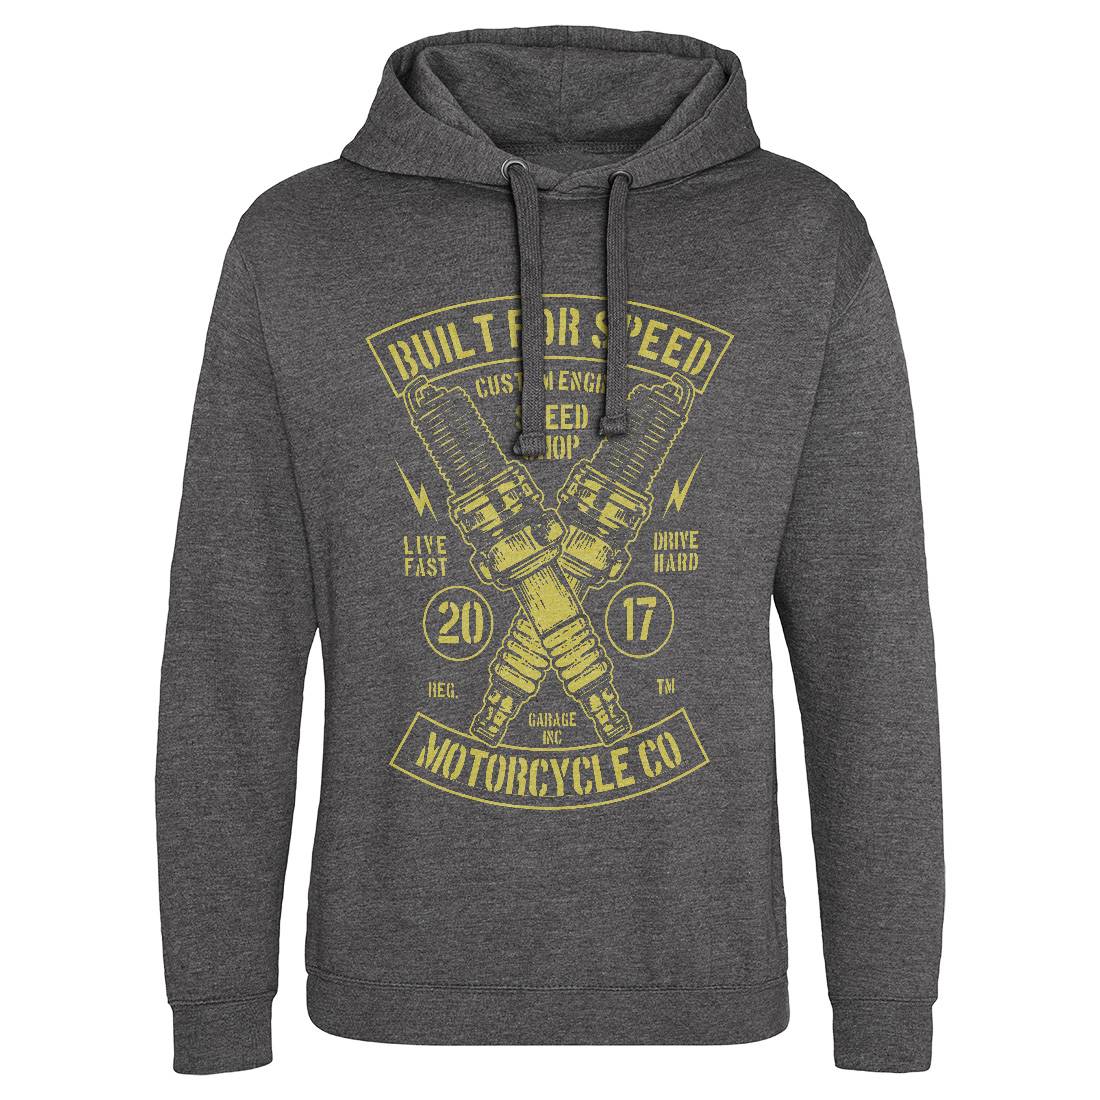 Built For Speed Mens Hoodie Without Pocket Motorcycles B188